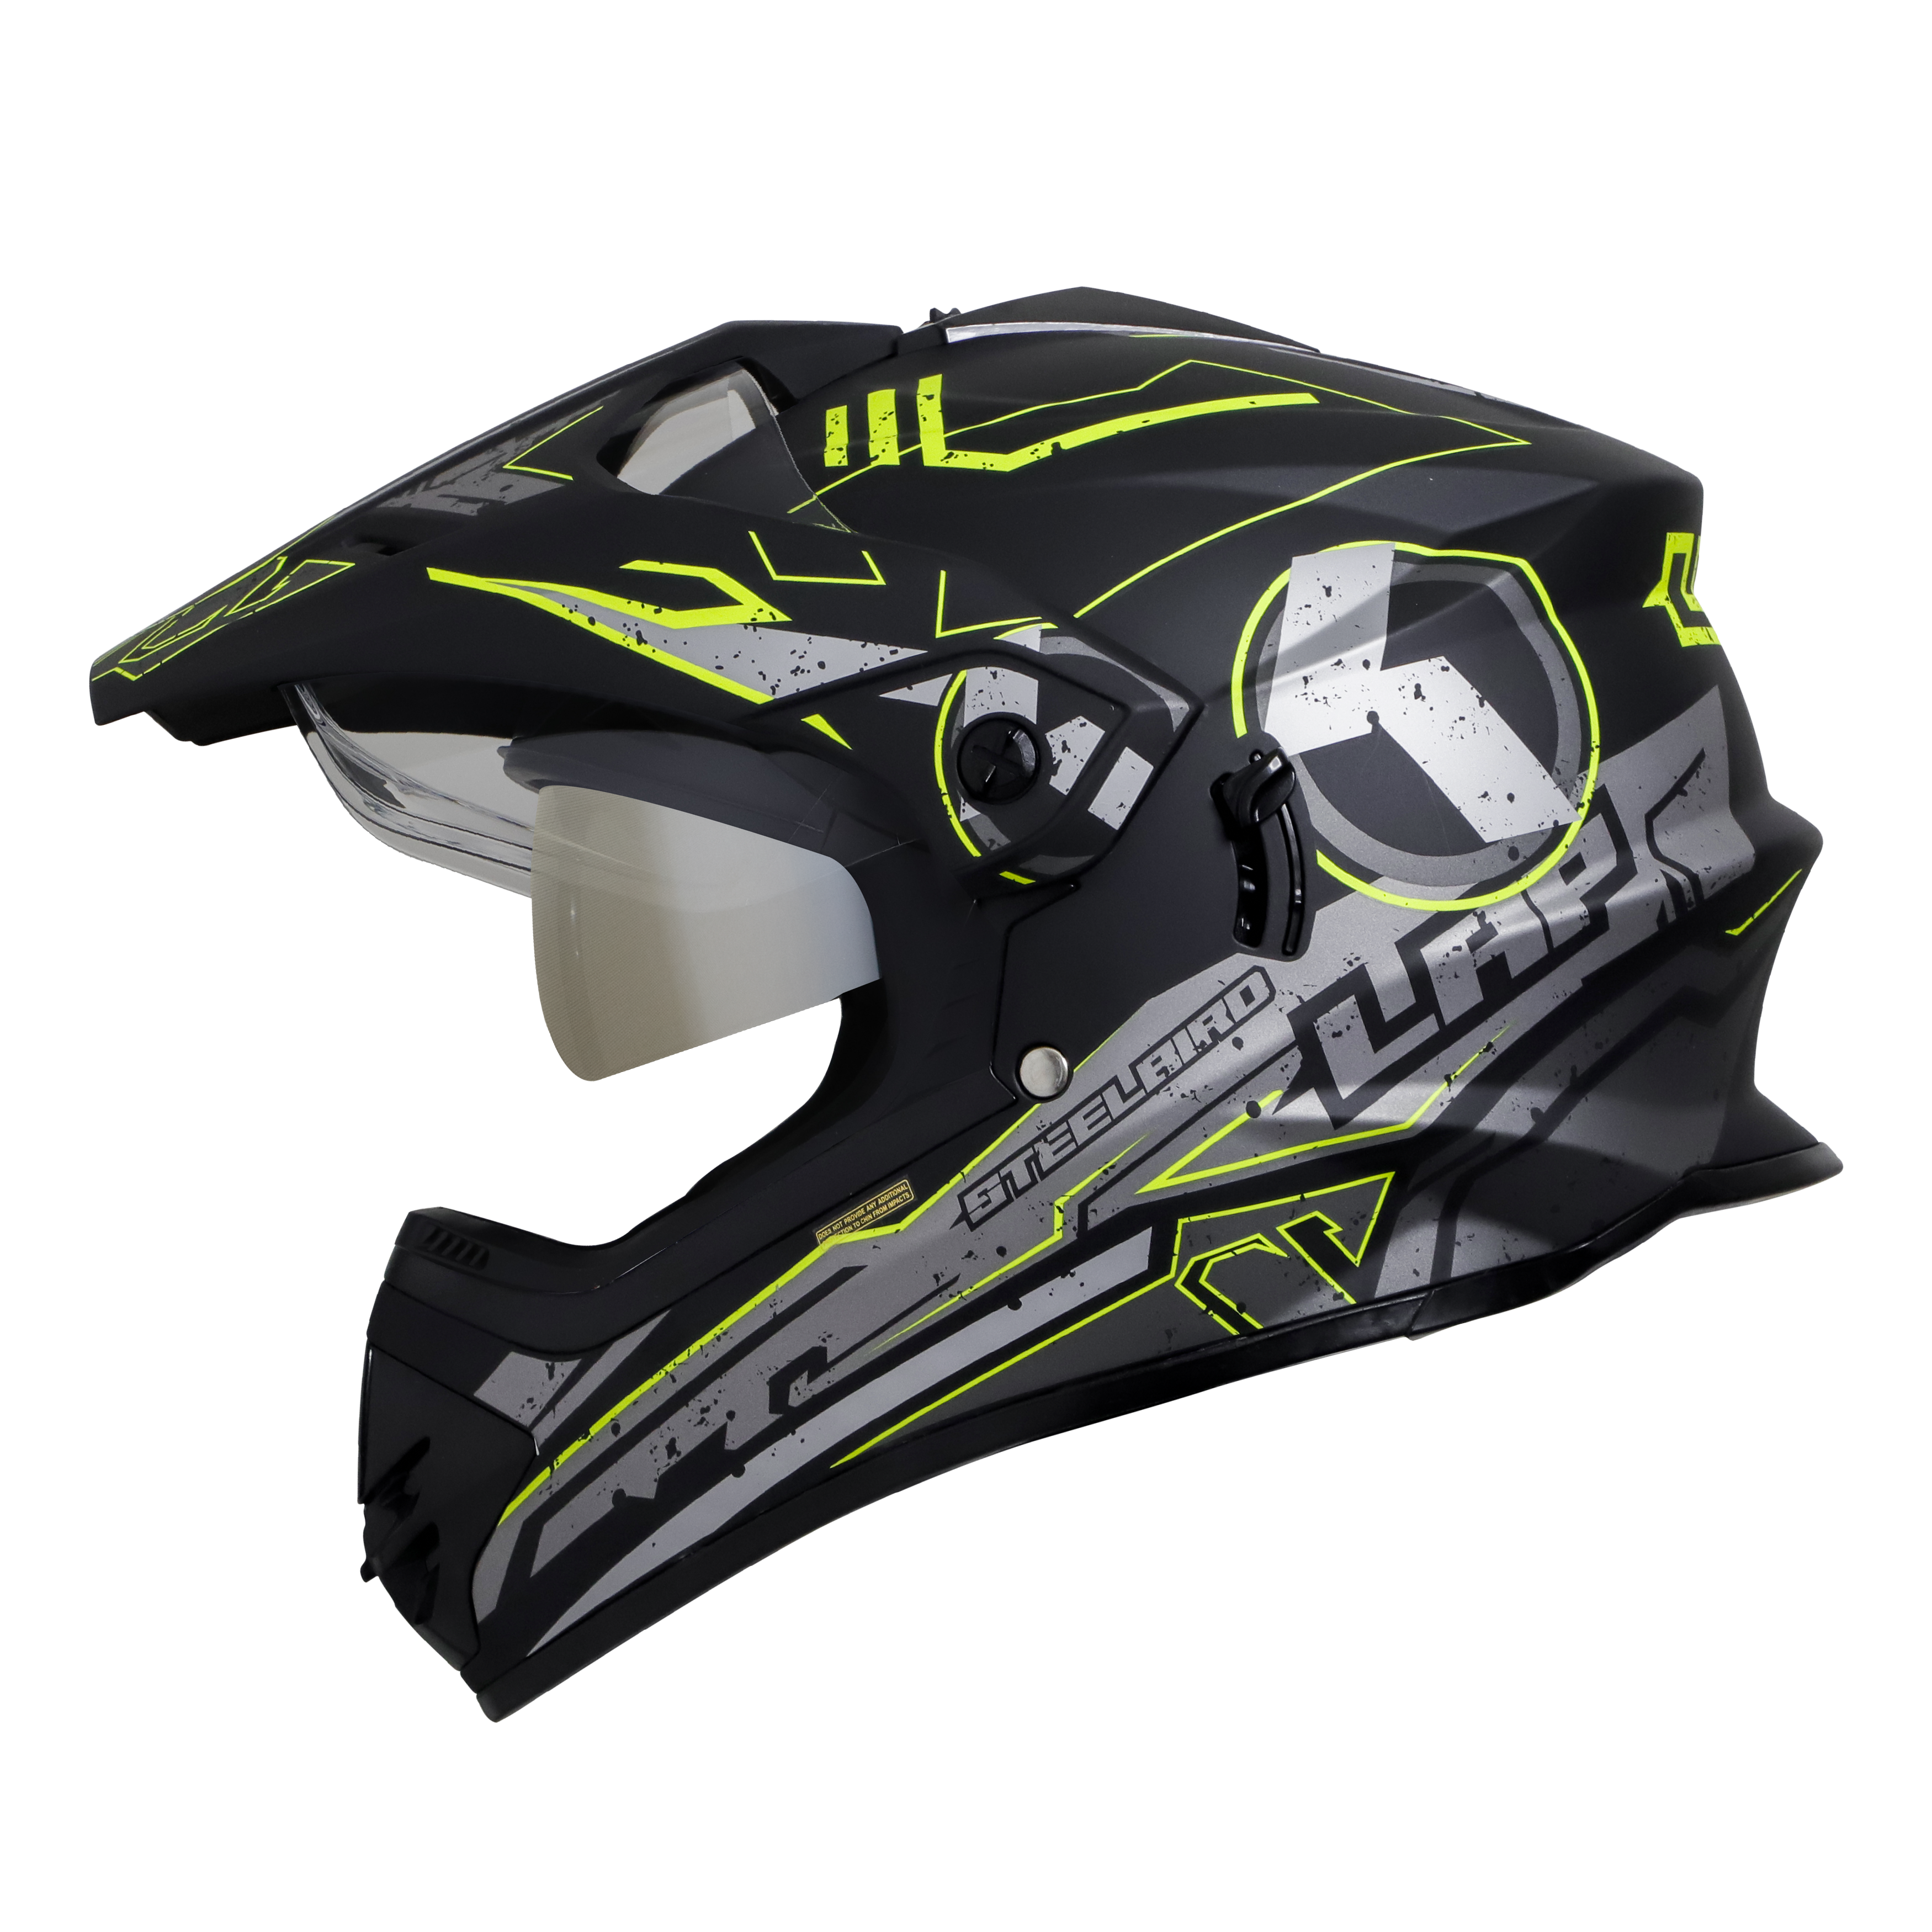 SB-42 BANG LAP GLOSSY BLACK WITH NEON (WITH CHROME SILVER INNER SUN SHIELD)